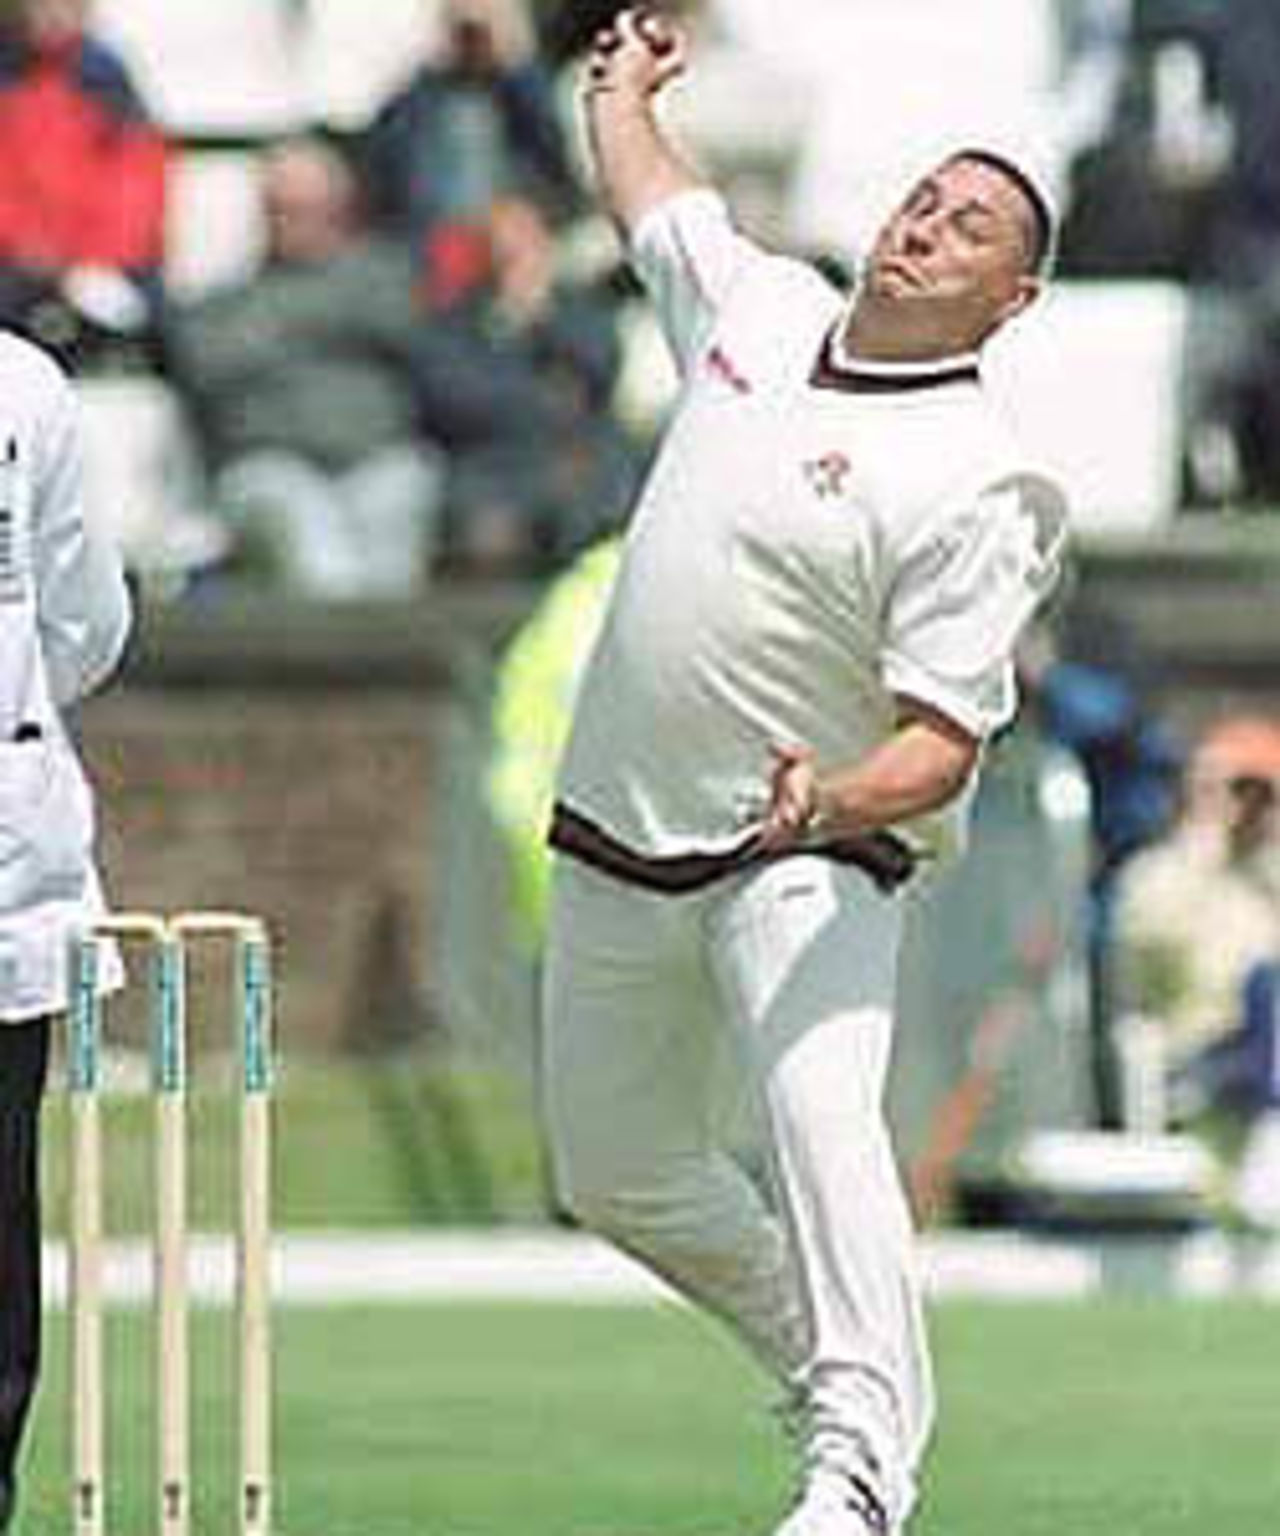 Ian Austin in action against Hampshire on his return to county cricket, PPP healthcare County Championship Division One, 2000, Lancashire v Hampshire, Aigburth, Liverpool 06-09 June 2000. (Day 1)